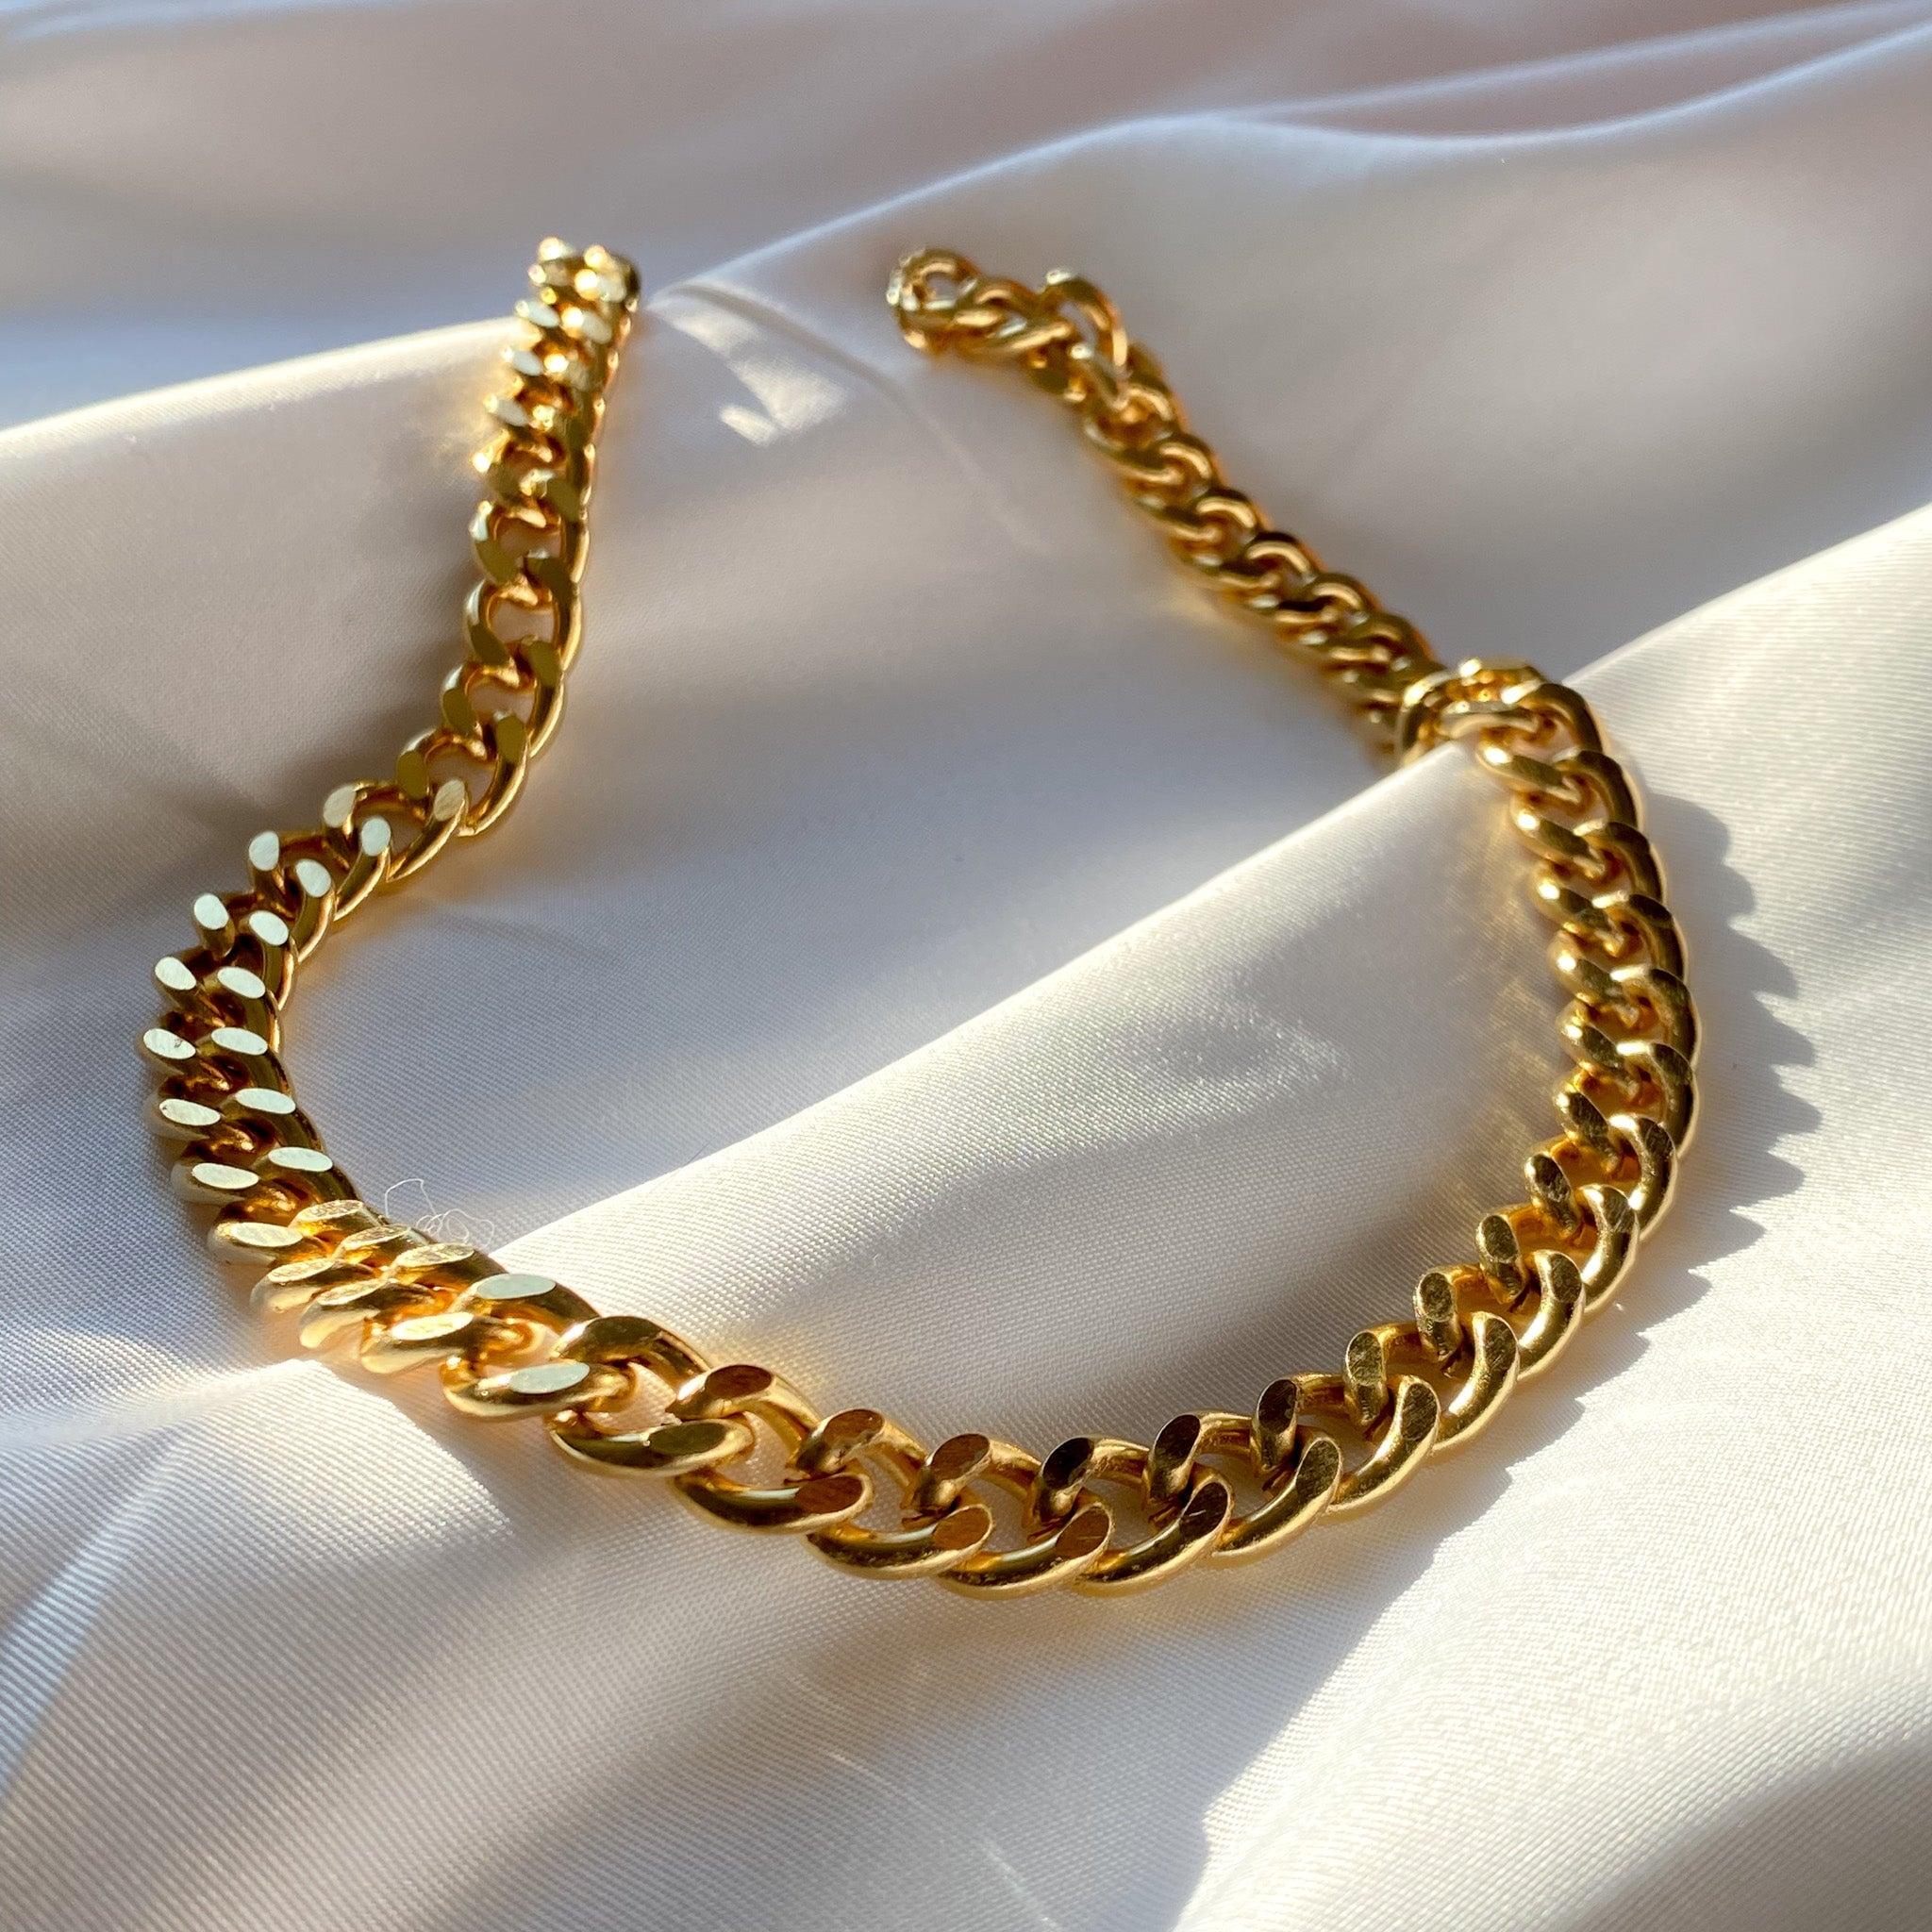 Vintage 1980s Chunky Chain Necklace 

Super versatile and contemporary chunky curb link chain necklace. 

This necklace is a deadstock item, made in the 1980s but remained packaged up and unworn. This 14.5